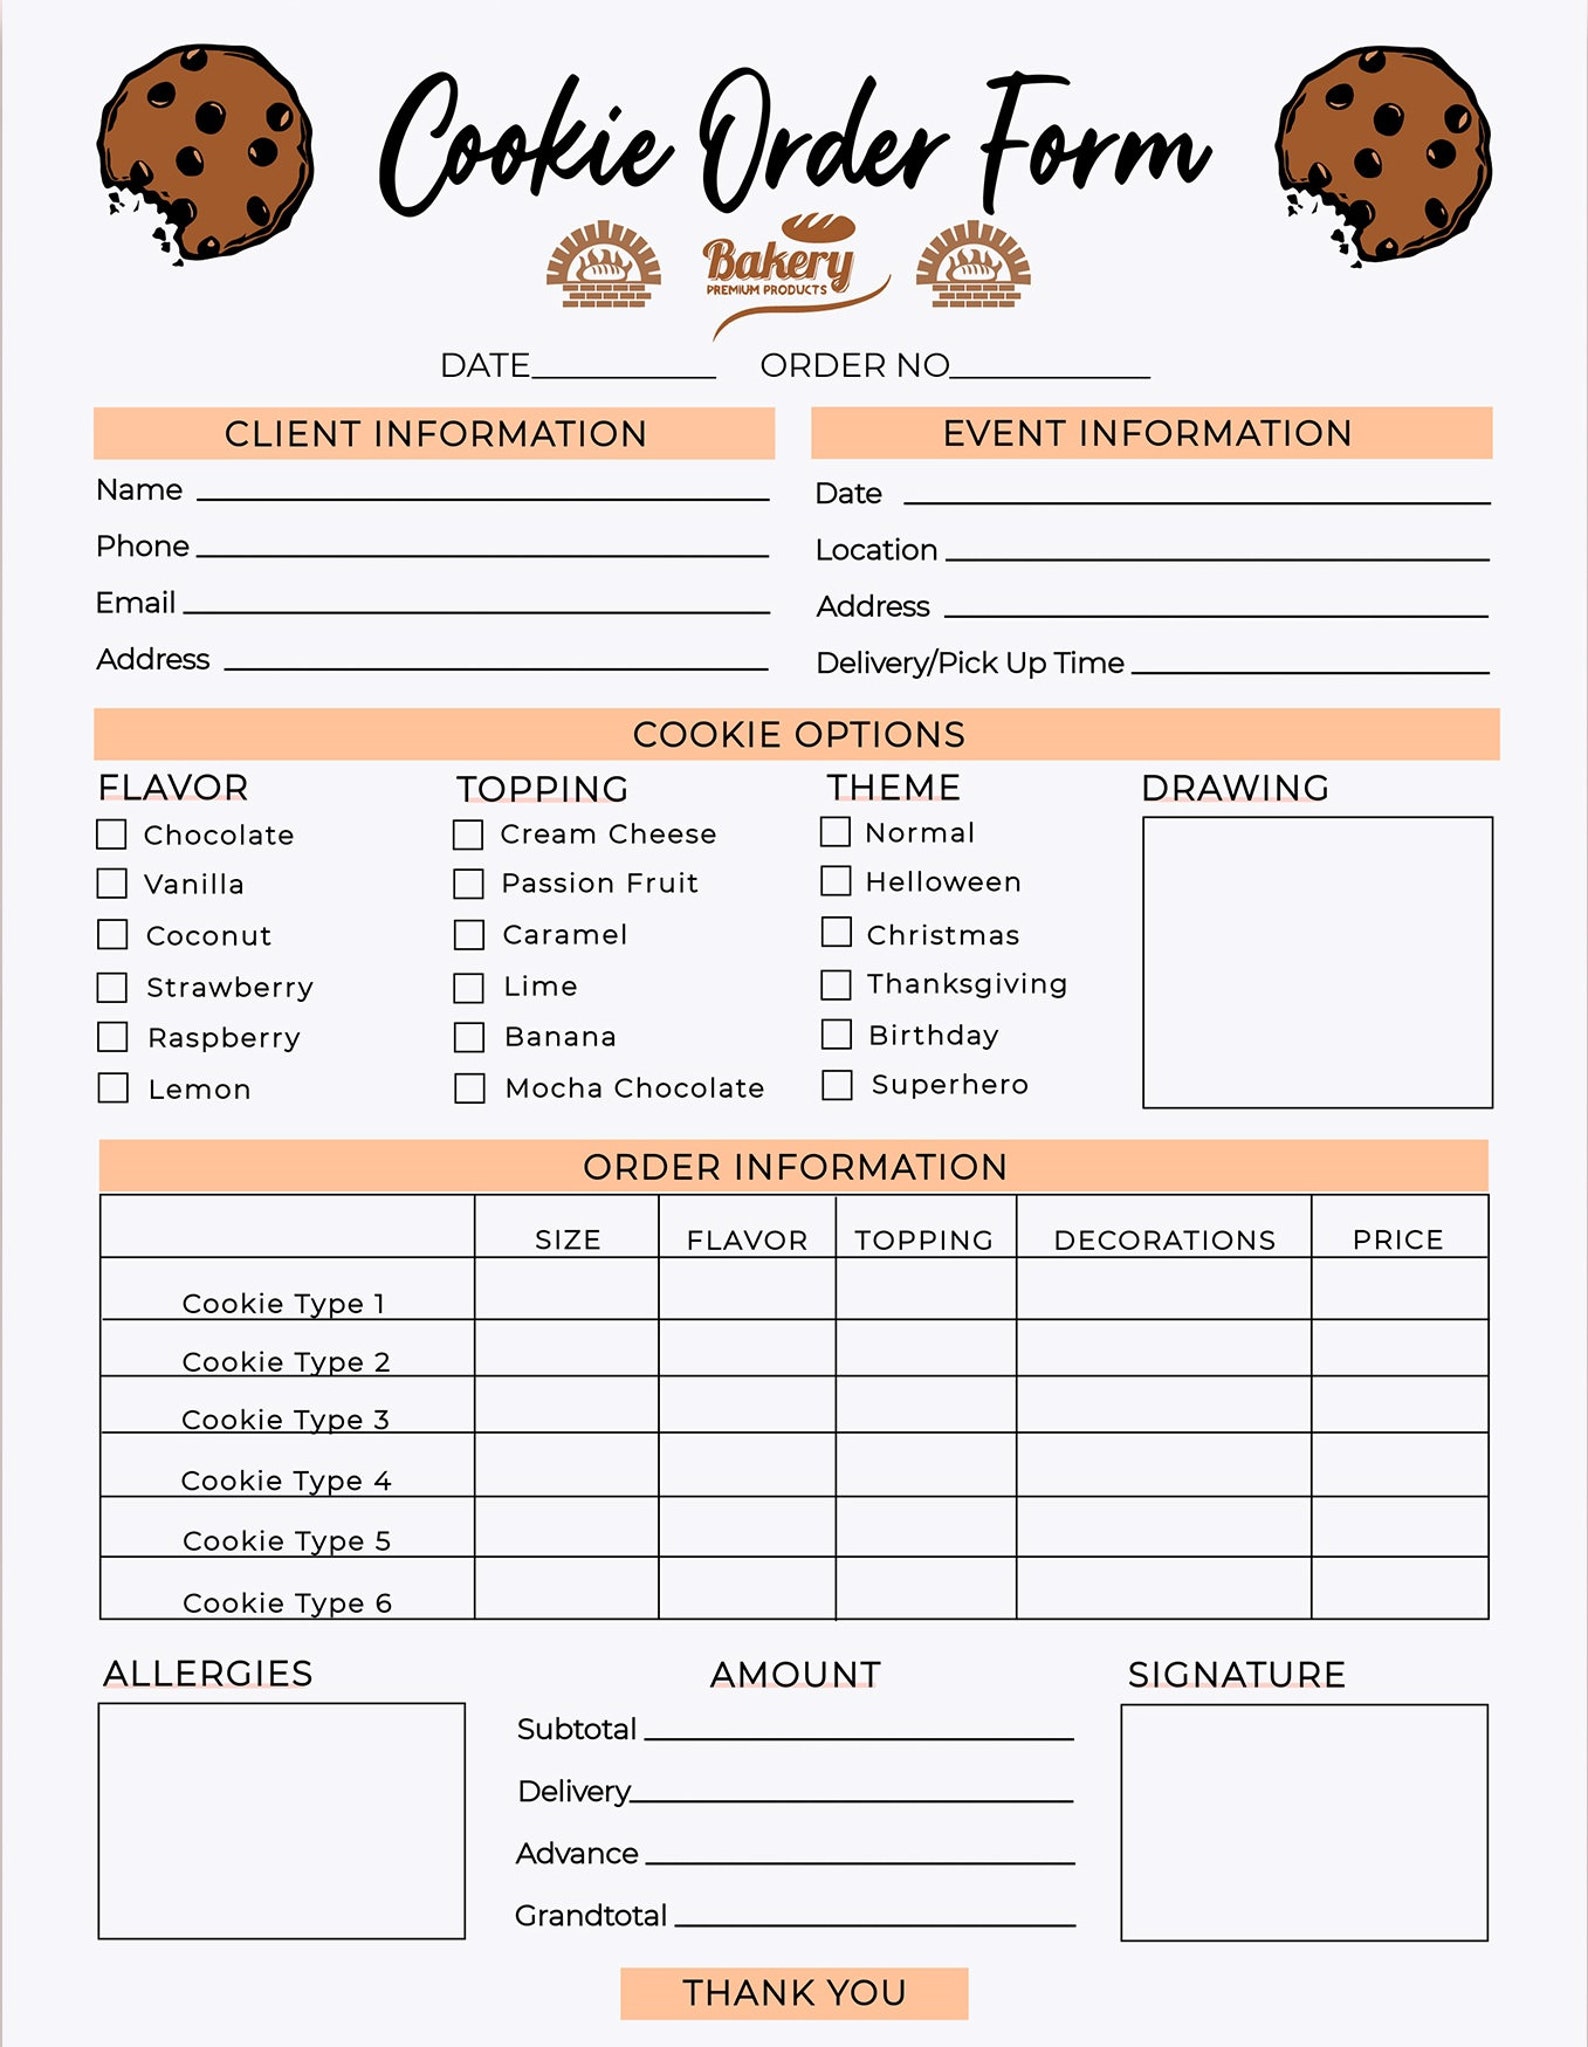 cookie-order-form-template-bakery-order-form-receipt-small-etsy